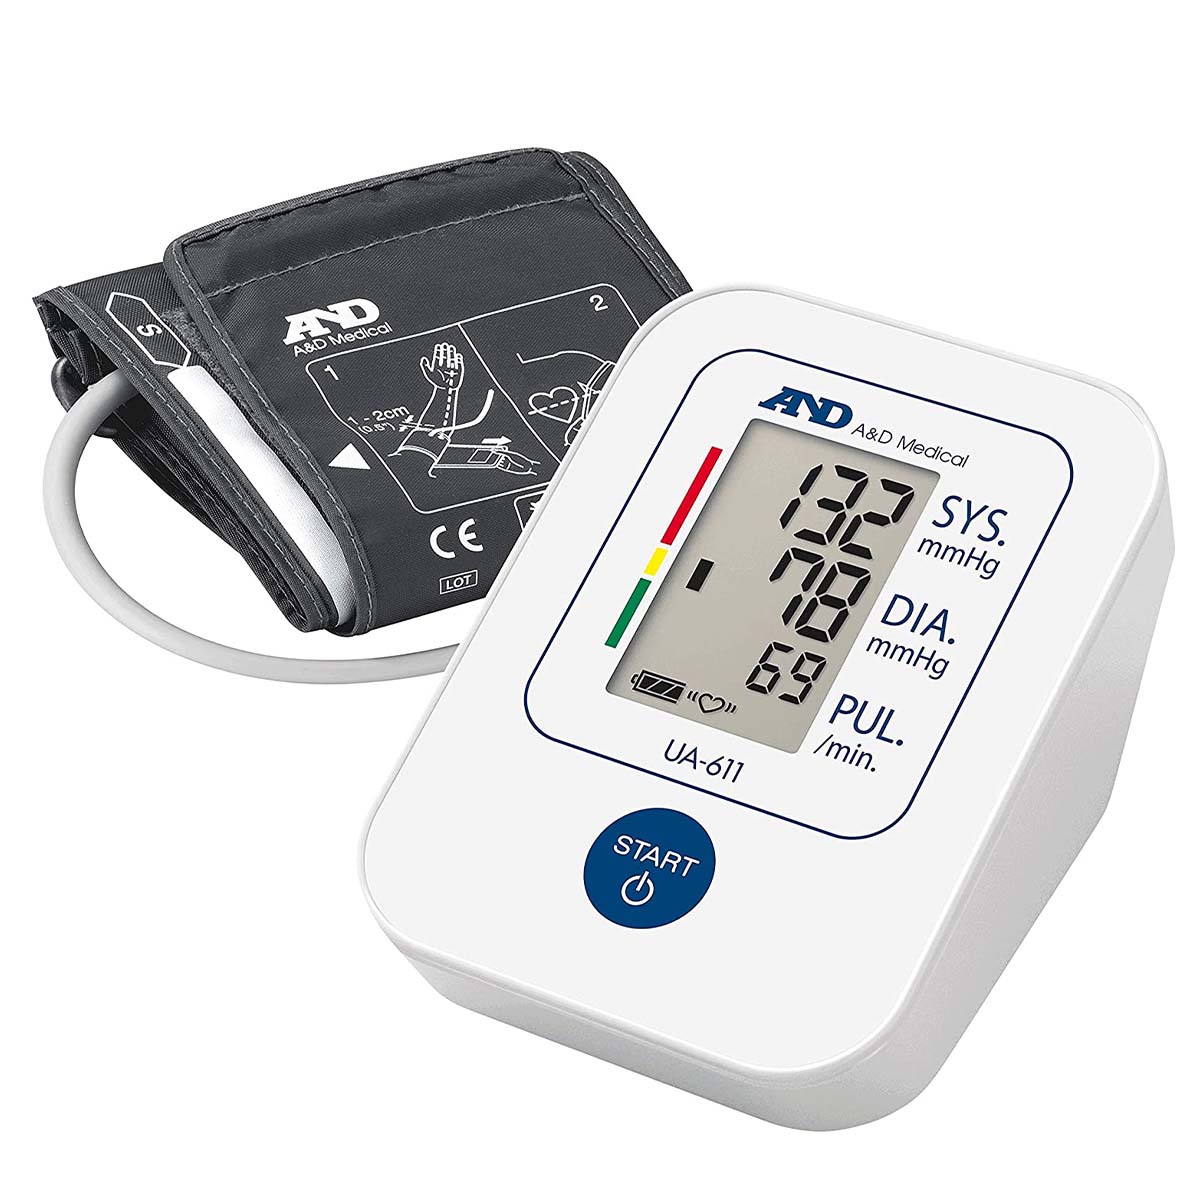 AND Medical UA-611 Blood Pressure Monitor 1 Piece